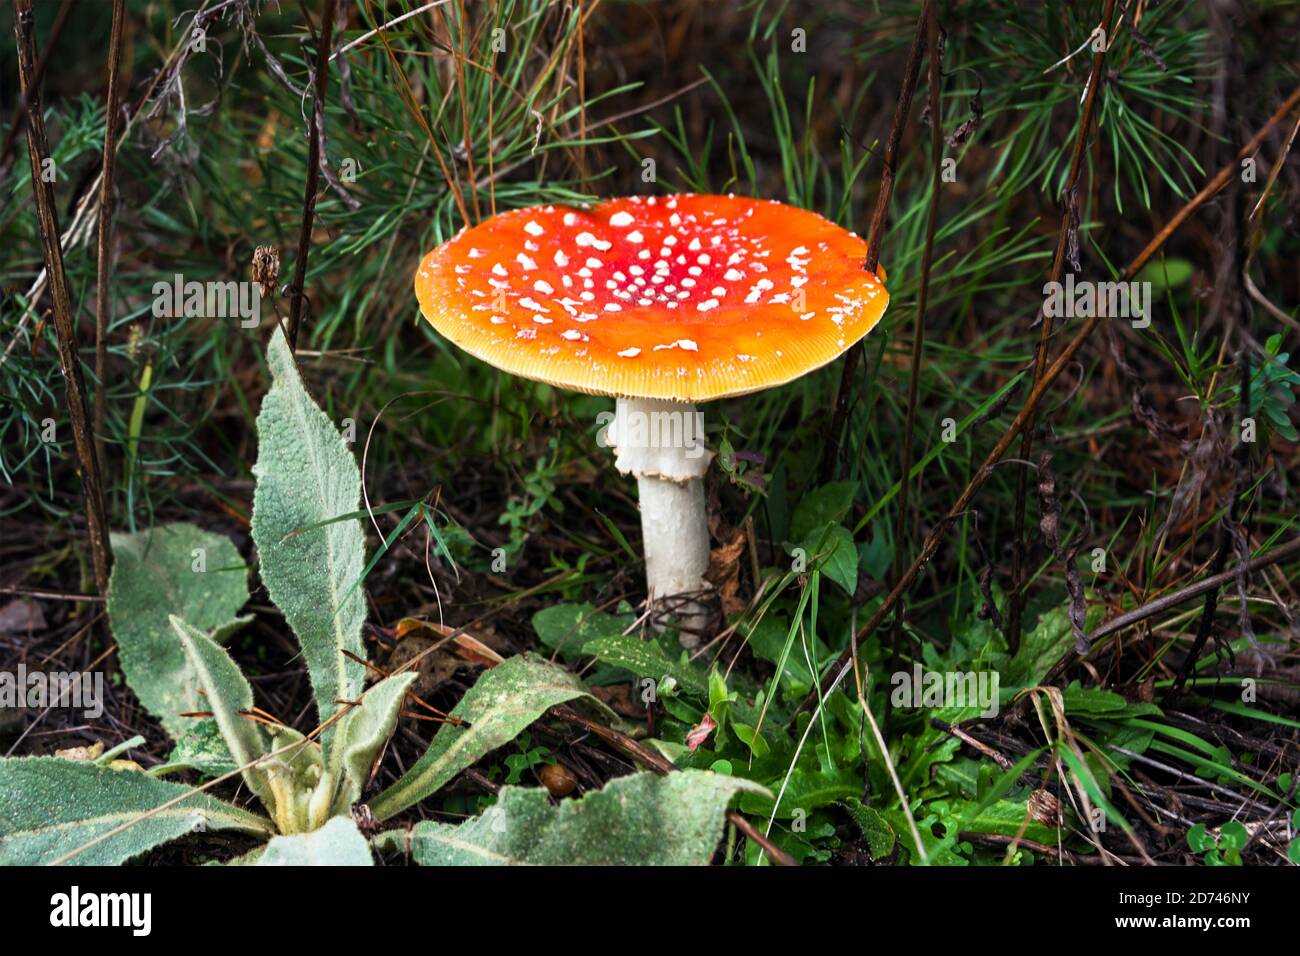 Red fly agaric mushroom or toadstool growing in the forest. Amanita muscaria, toxic mushroom. Poisonous mushroom famous for its brightly red coloured Stock Photo